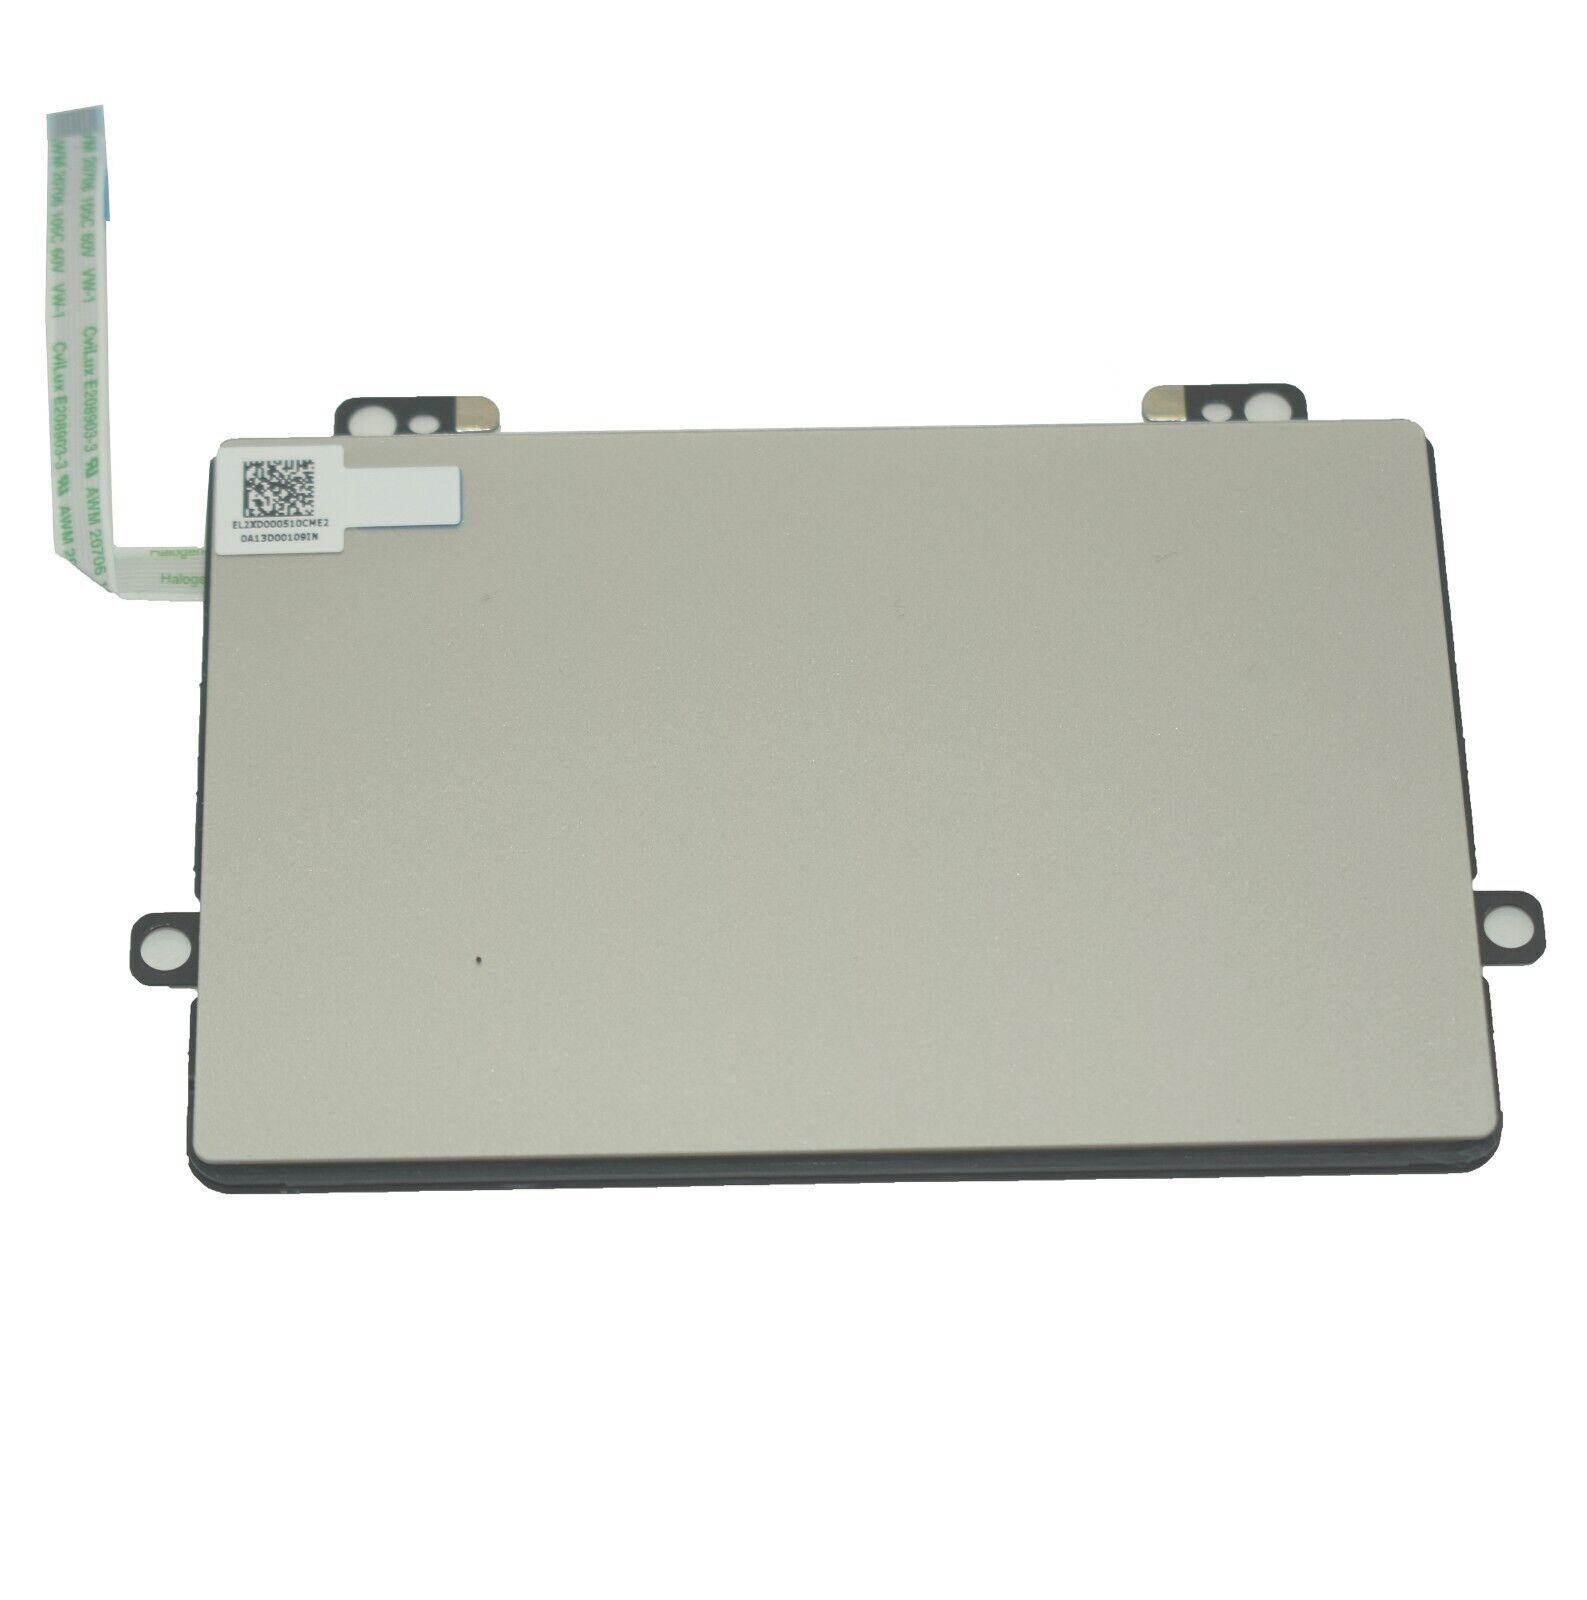 New Touchpad Clickpad Trackpad For ThinkBook 15 G4 Laptop